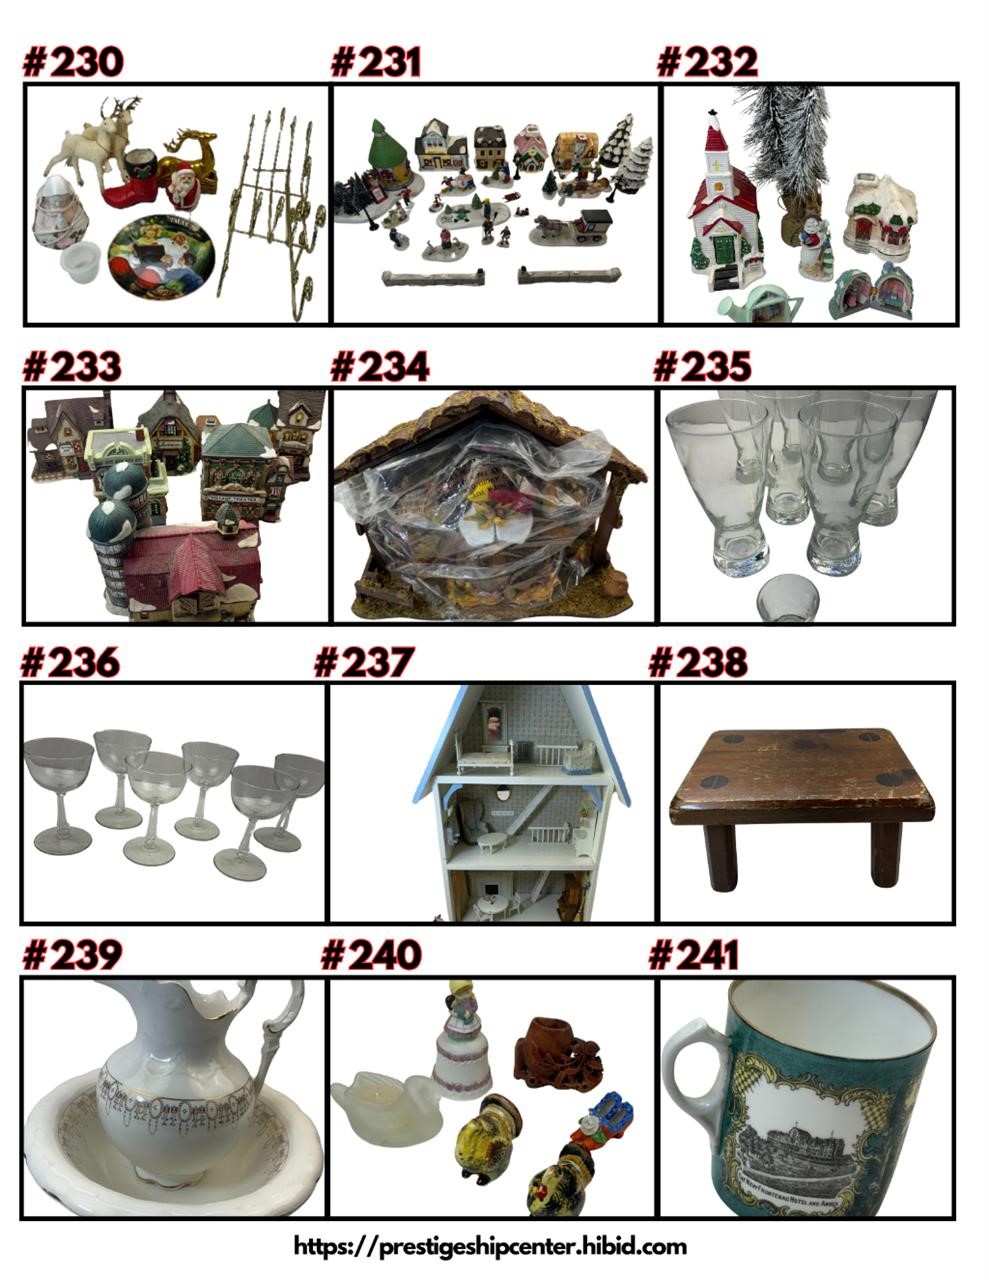 Absolute Estate Auction, Preserved Treasures of a Mother!